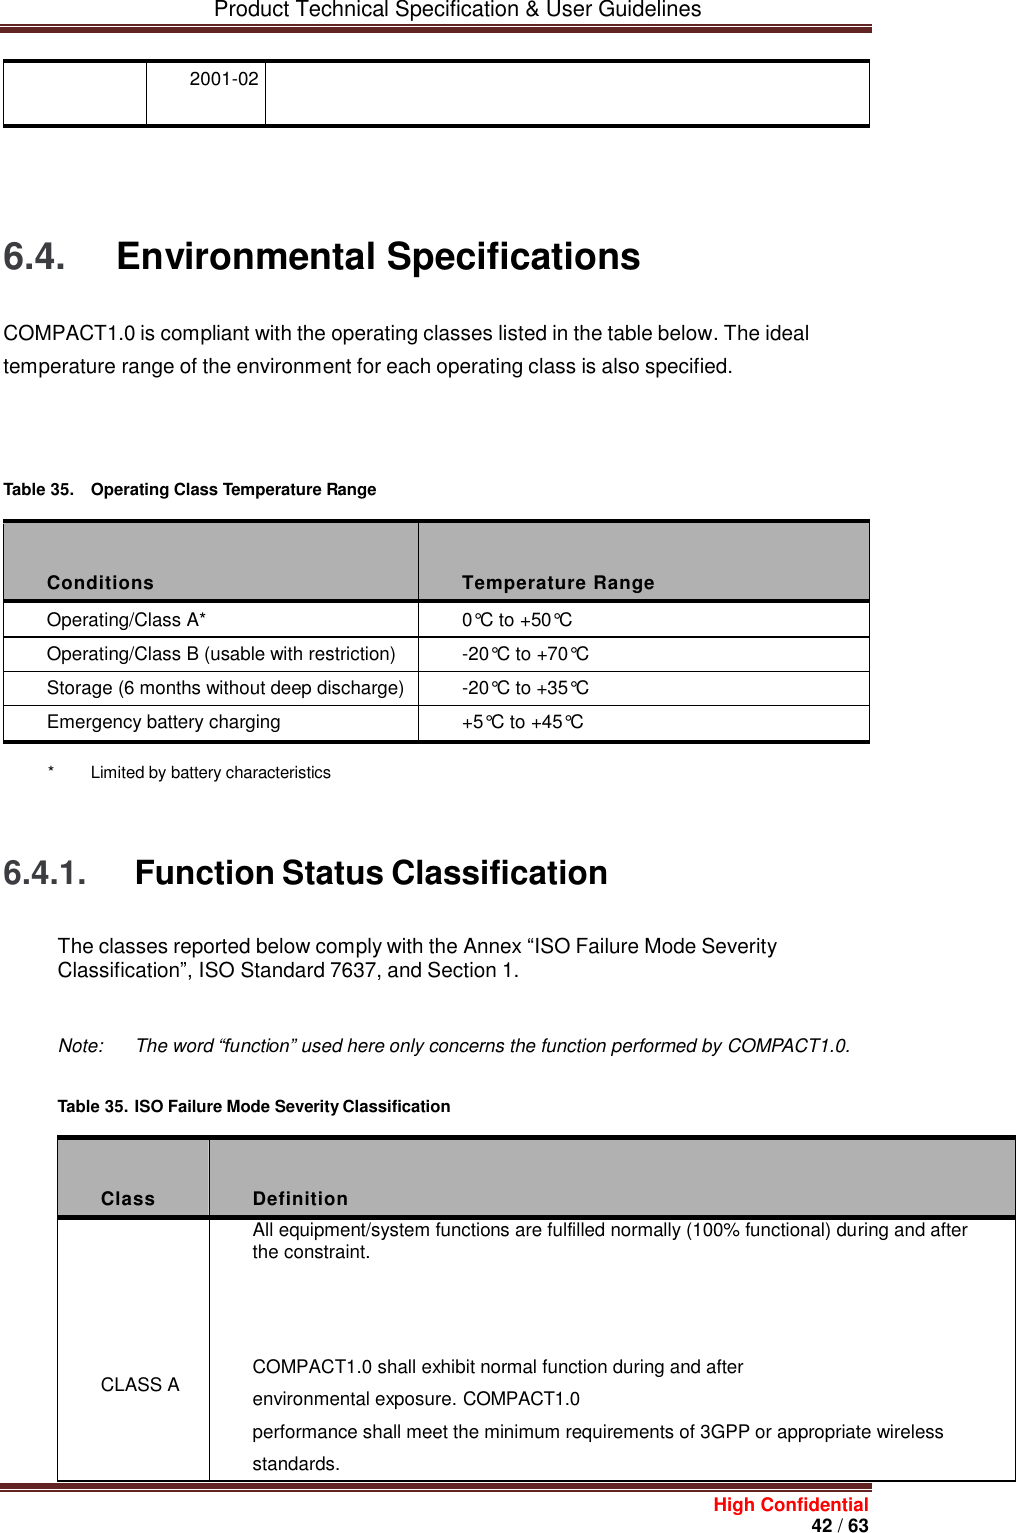         Product Technical Specification &amp; User Guidelines     High Confidential       42 / 63  2001-02        6.4.  Environmental Specifications COMPACT1.0 is compliant with the operating classes listed in the table below. The ideal temperature range of the environment for each operating class is also specified.  Table 35.  Operating Class Temperature Range    Conditions  Temperature Range Operating/Class A* 0°C to +50°C Operating/Class B (usable with restriction) -20°C to +70°C Storage (6 months without deep discharge) -20°C to +35°C Emergency battery charging +5°C to +45°C   *  Limited by battery characteristics    6.4.1. Function Status Classification The classes reported below comply with the Annex “ISO Failure Mode Severity Classification”, ISO Standard 7637, and Section 1.  Note:  The word “function” used here only concerns the function performed by COMPACT1.0.  Table 35. ISO Failure Mode Severity Classification    Class  Definition    CLASS A All equipment/system functions are fulfilled normally (100% functional) during and after the constraint.  COMPACT1.0 shall exhibit normal function during and after environmental exposure. COMPACT1.0 performance shall meet the minimum requirements of 3GPP or appropriate wireless standards. 